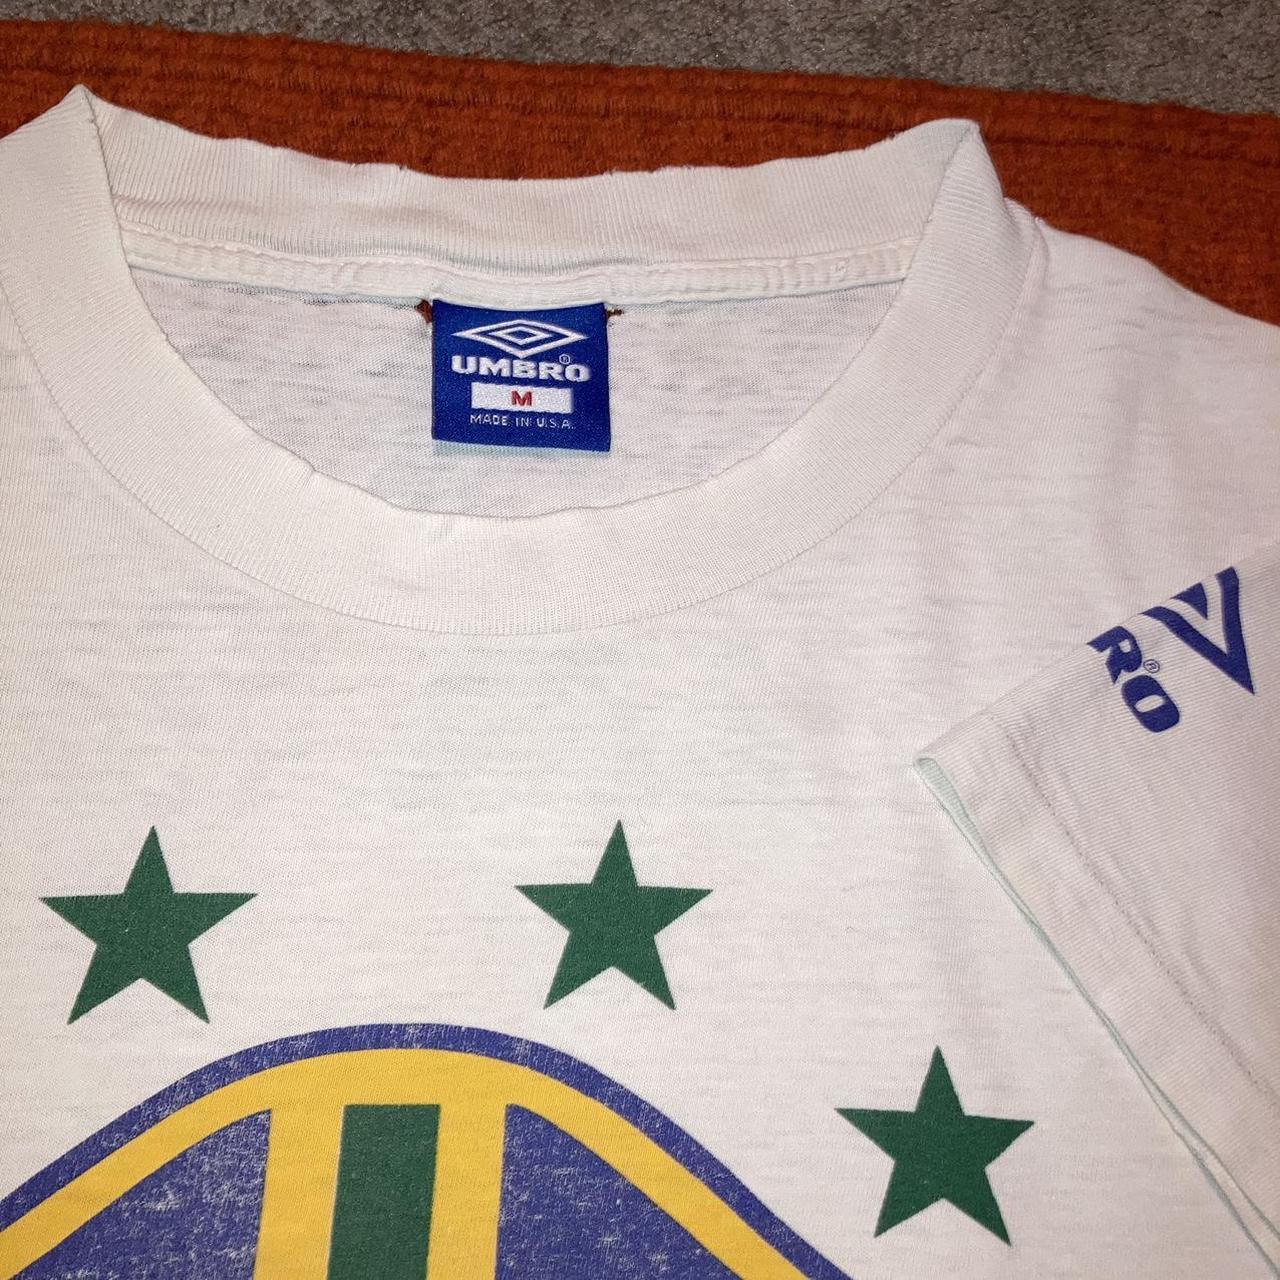 vintage 1994 pitted Umbro Brasil “Four-Ever Great!”